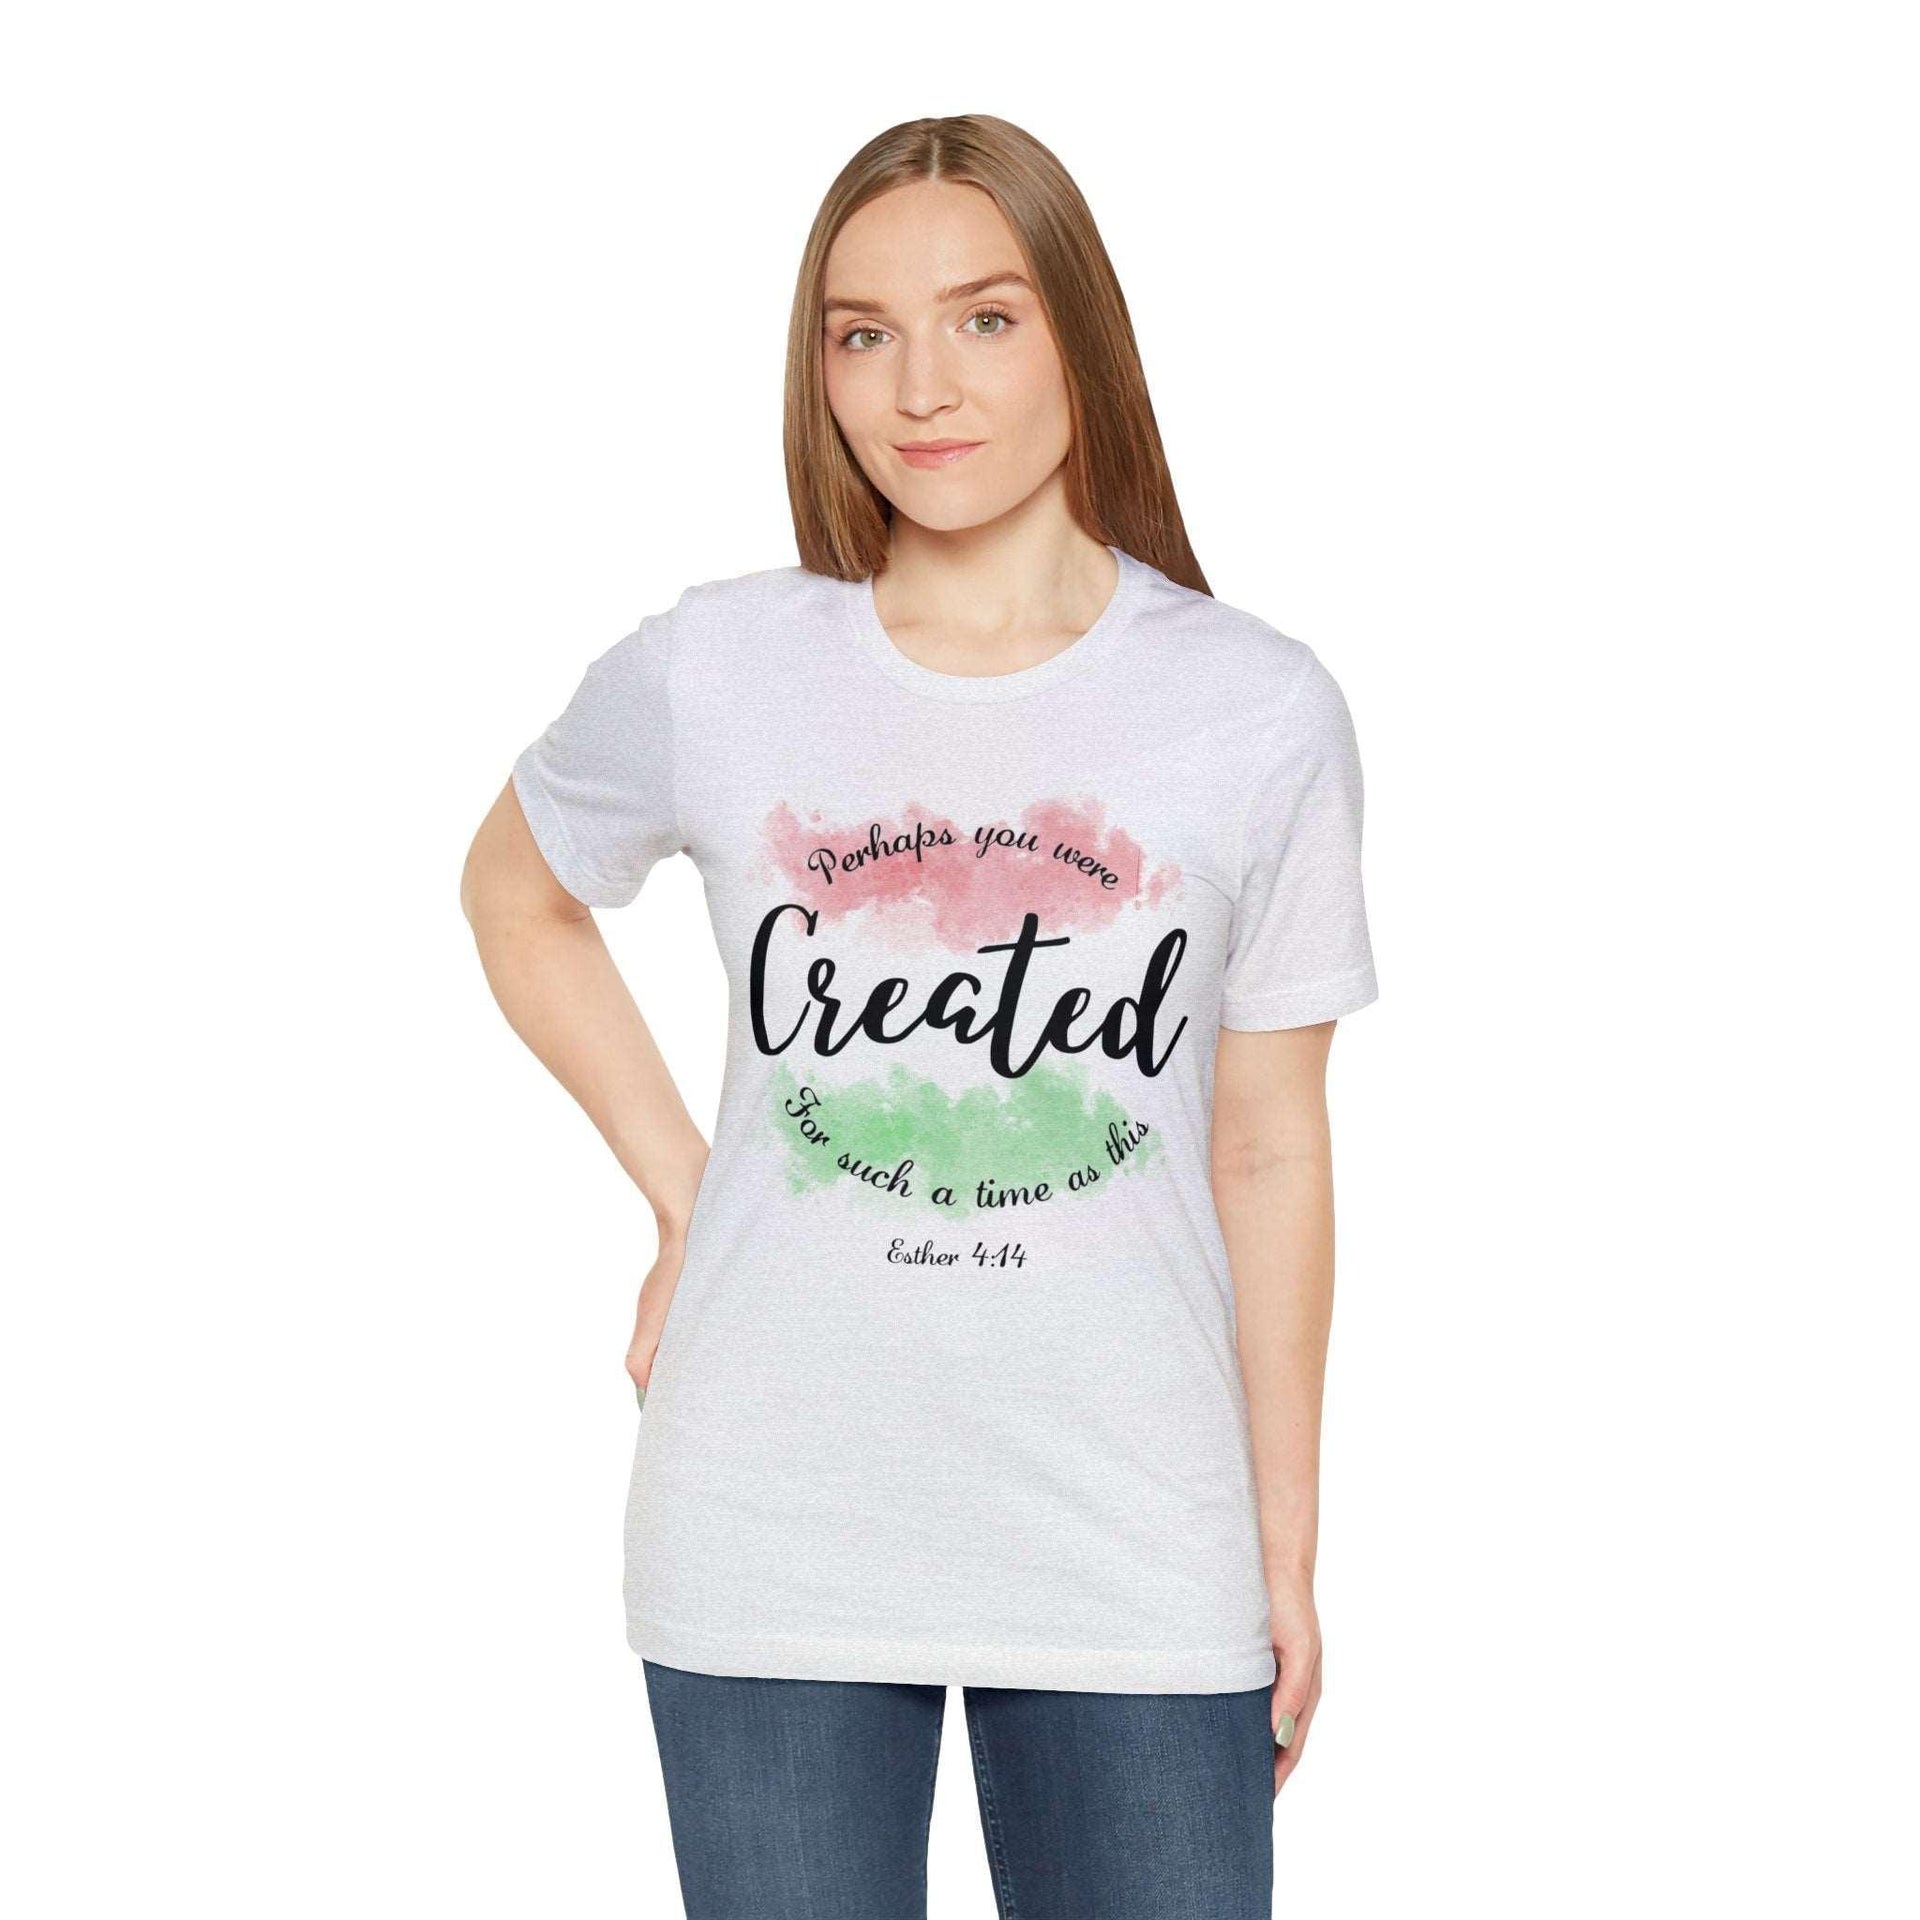 Esther 4:14 Created Graphic Tee